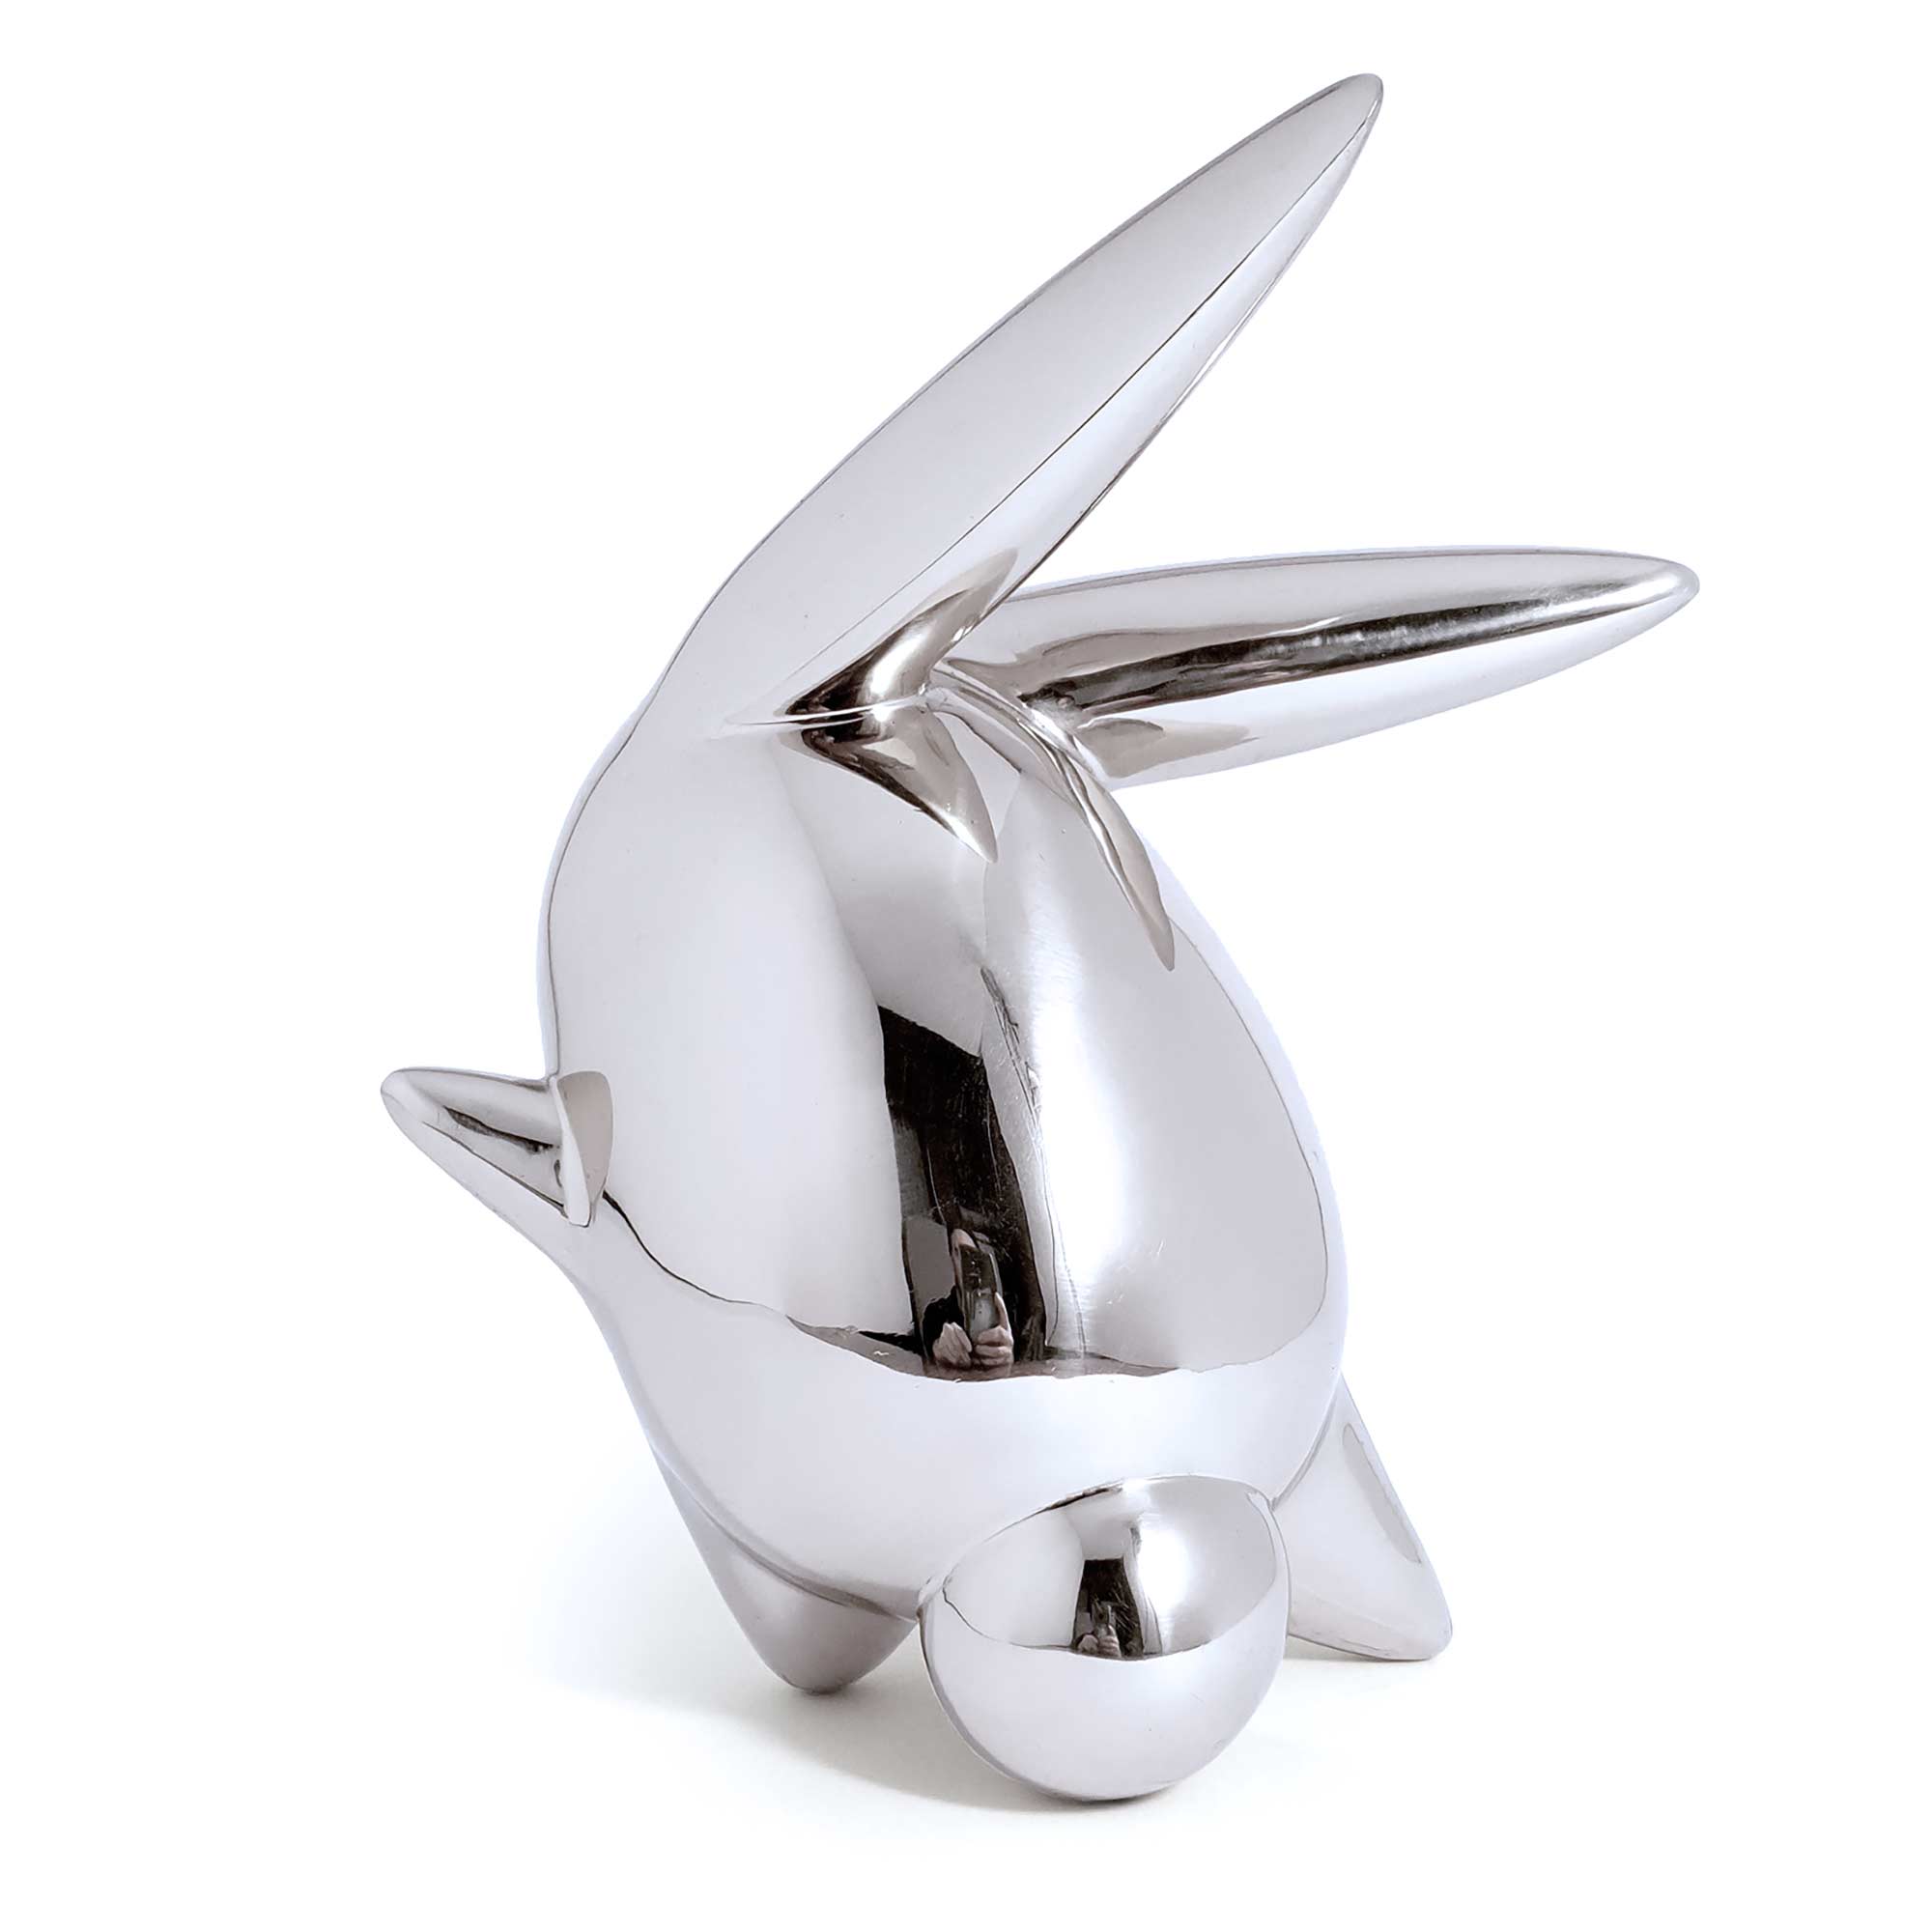 Flight or Fight, bunny rabbit sculpture, Mirror Polished Stainless Steel Sculpture, by artist Ferdi B Dick, back view 